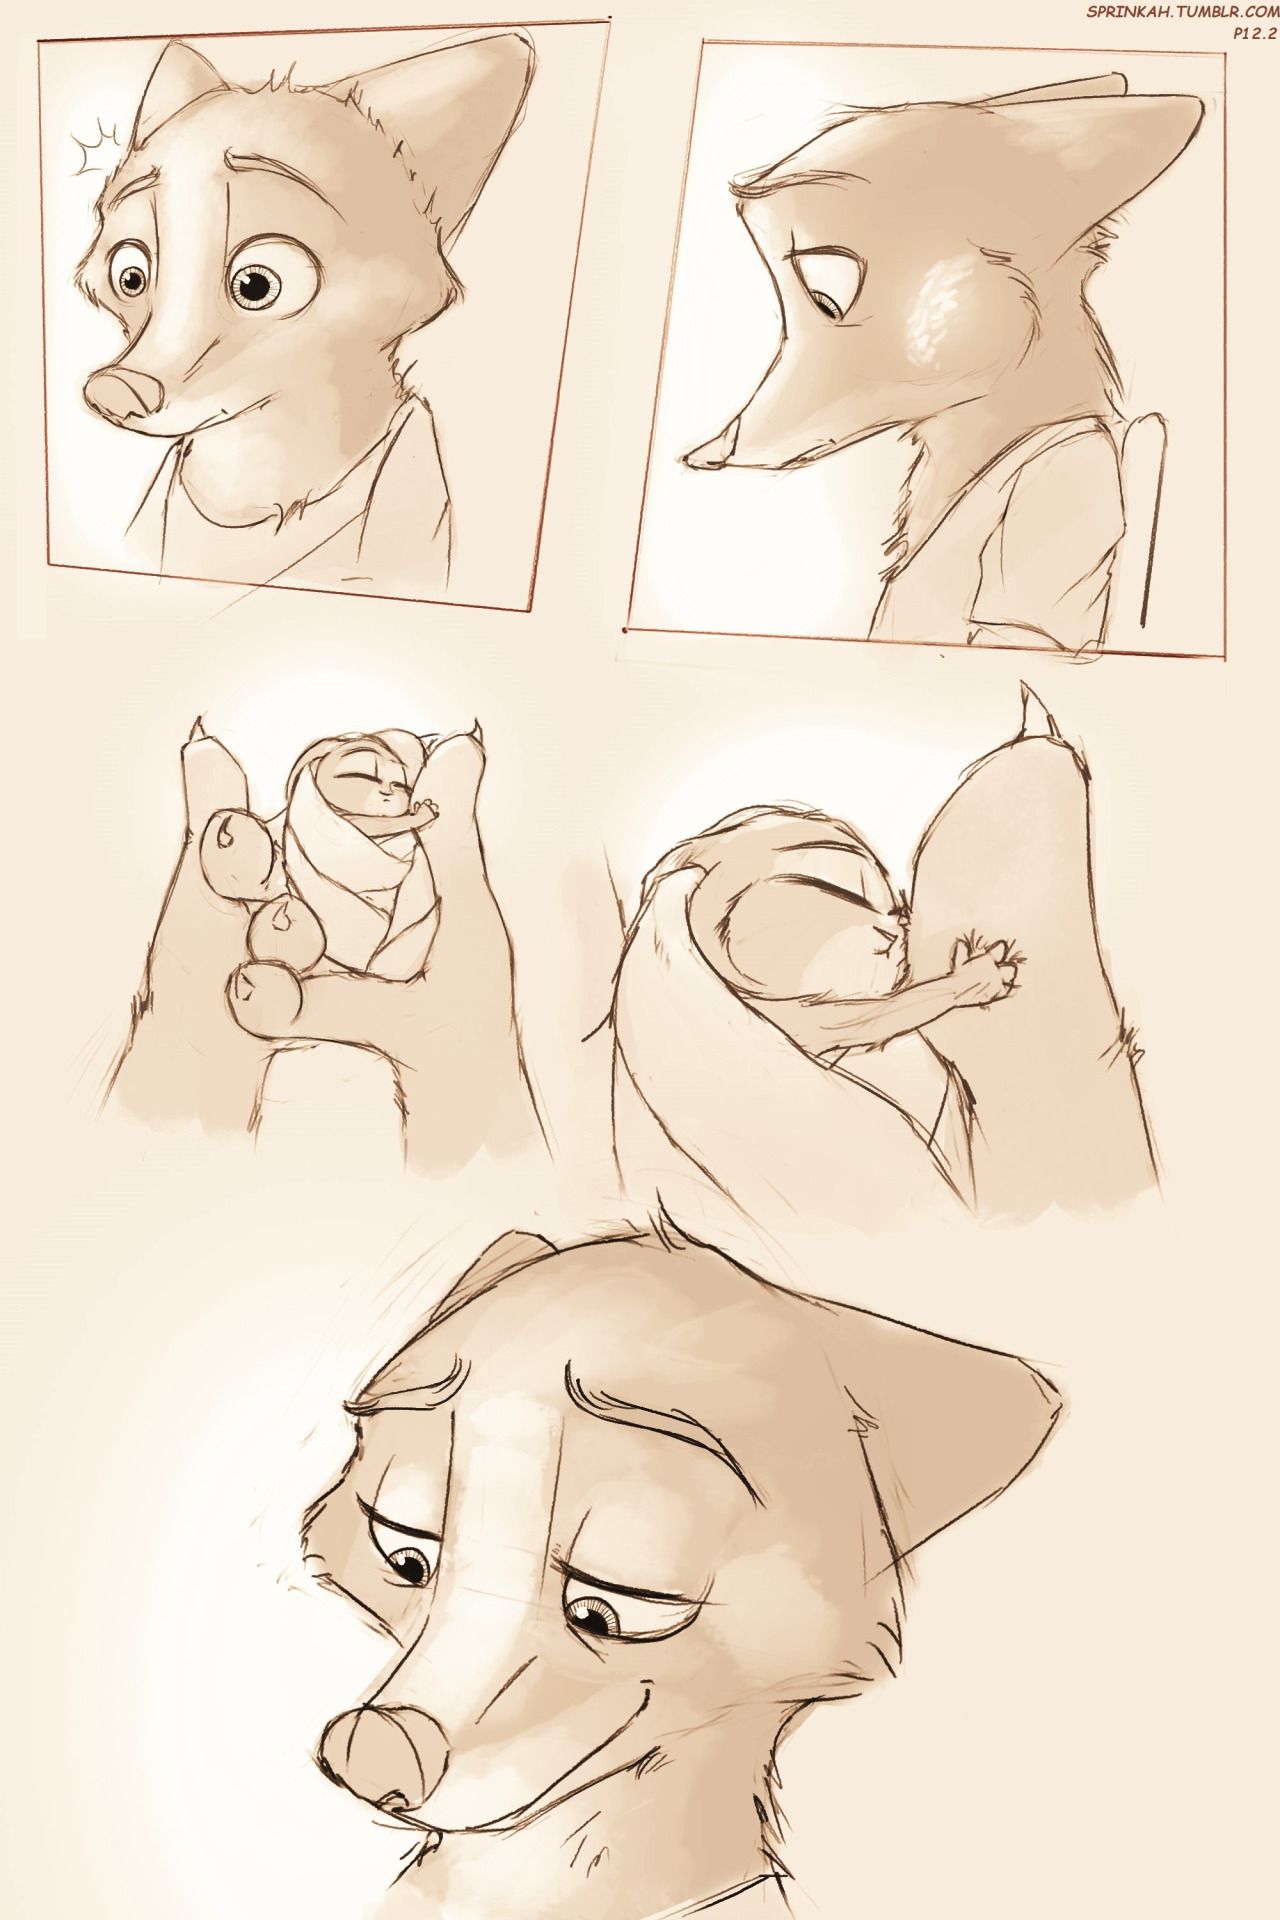 [Sprinkah] This is what true love looks like (Zootopia) (Spanish) (On Going) [Landsec] http://sprinkah.tumblr.com/ 21